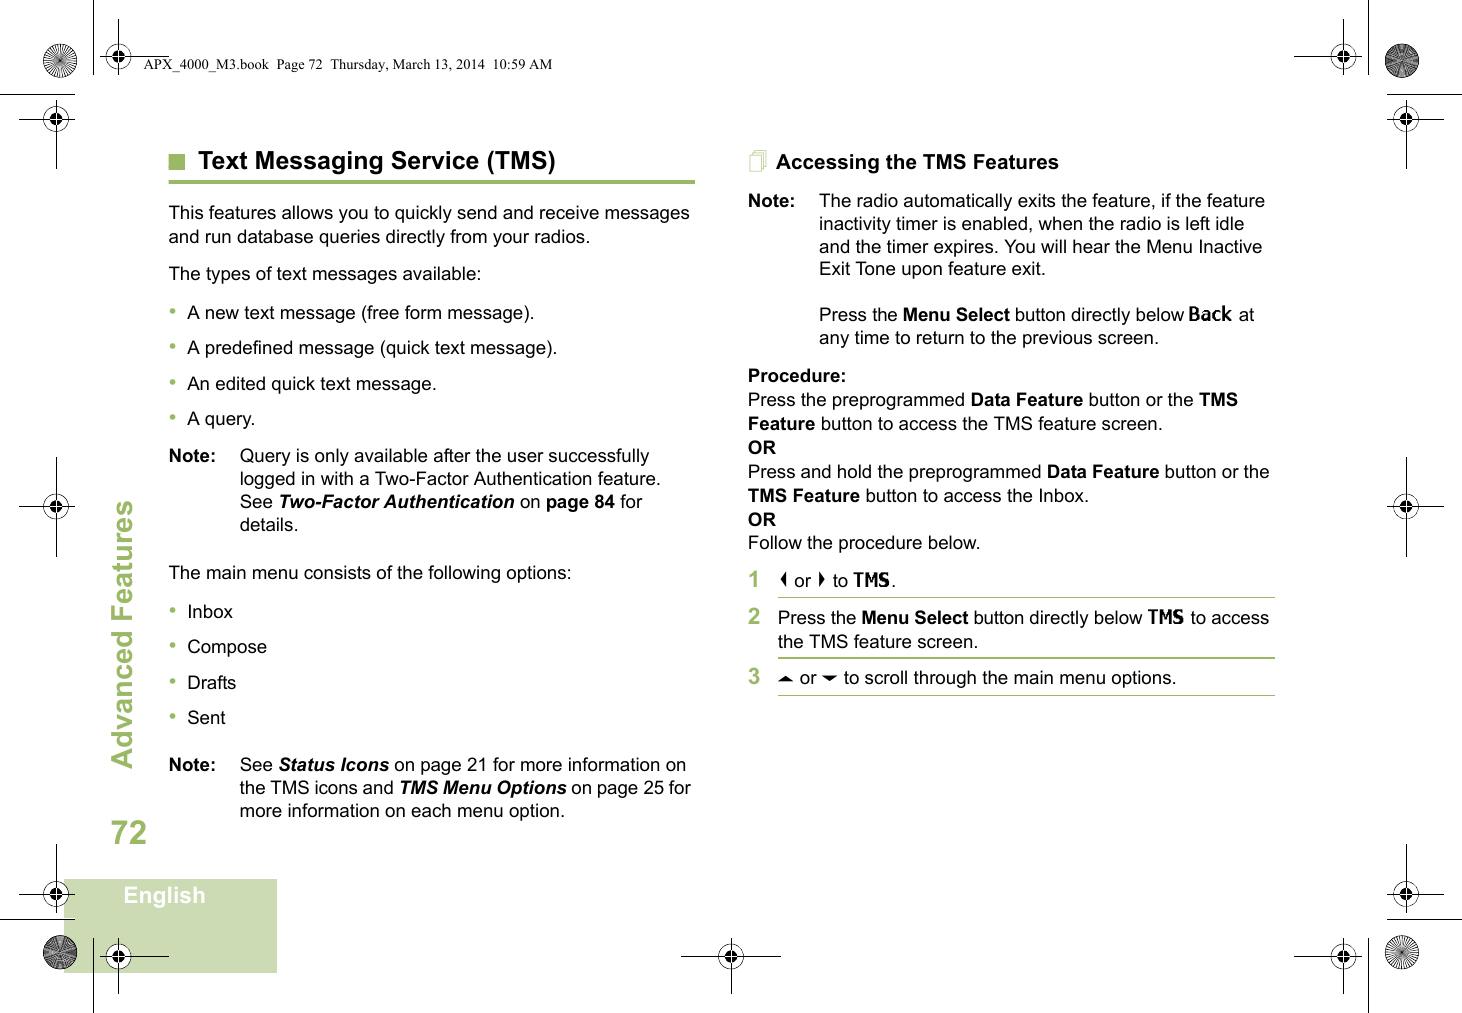 Advanced FeaturesEnglish72Text Messaging Service (TMS)This features allows you to quickly send and receive messages and run database queries directly from your radios.The types of text messages available:•A new text message (free form message).•A predefined message (quick text message).•An edited quick text message.•A query.Note: Query is only available after the user successfully logged in with a Two-Factor Authentication feature. See Two-Factor Authentication on page 84 for details.The main menu consists of the following options:•Inbox•Compose•Drafts•SentNote: See Status Icons on page 21 for more information on the TMS icons and TMS Menu Options on page 25 for more information on each menu option.Accessing the TMS FeaturesNote: The radio automatically exits the feature, if the feature inactivity timer is enabled, when the radio is left idle and the timer expires. You will hear the Menu Inactive Exit Tone upon feature exit.Press the Menu Select button directly below Back at any time to return to the previous screen.Procedure:Press the preprogrammed Data Feature button or the TMS Feature button to access the TMS feature screen.ORPress and hold the preprogrammed Data Feature button or the TMS Feature button to access the Inbox.ORFollow the procedure below.1&lt; or &gt; to TMS.2Press the Menu Select button directly below TMS to access the TMS feature screen.3U or D to scroll through the main menu options.APX_4000_M3.book  Page 72  Thursday, March 13, 2014  10:59 AM